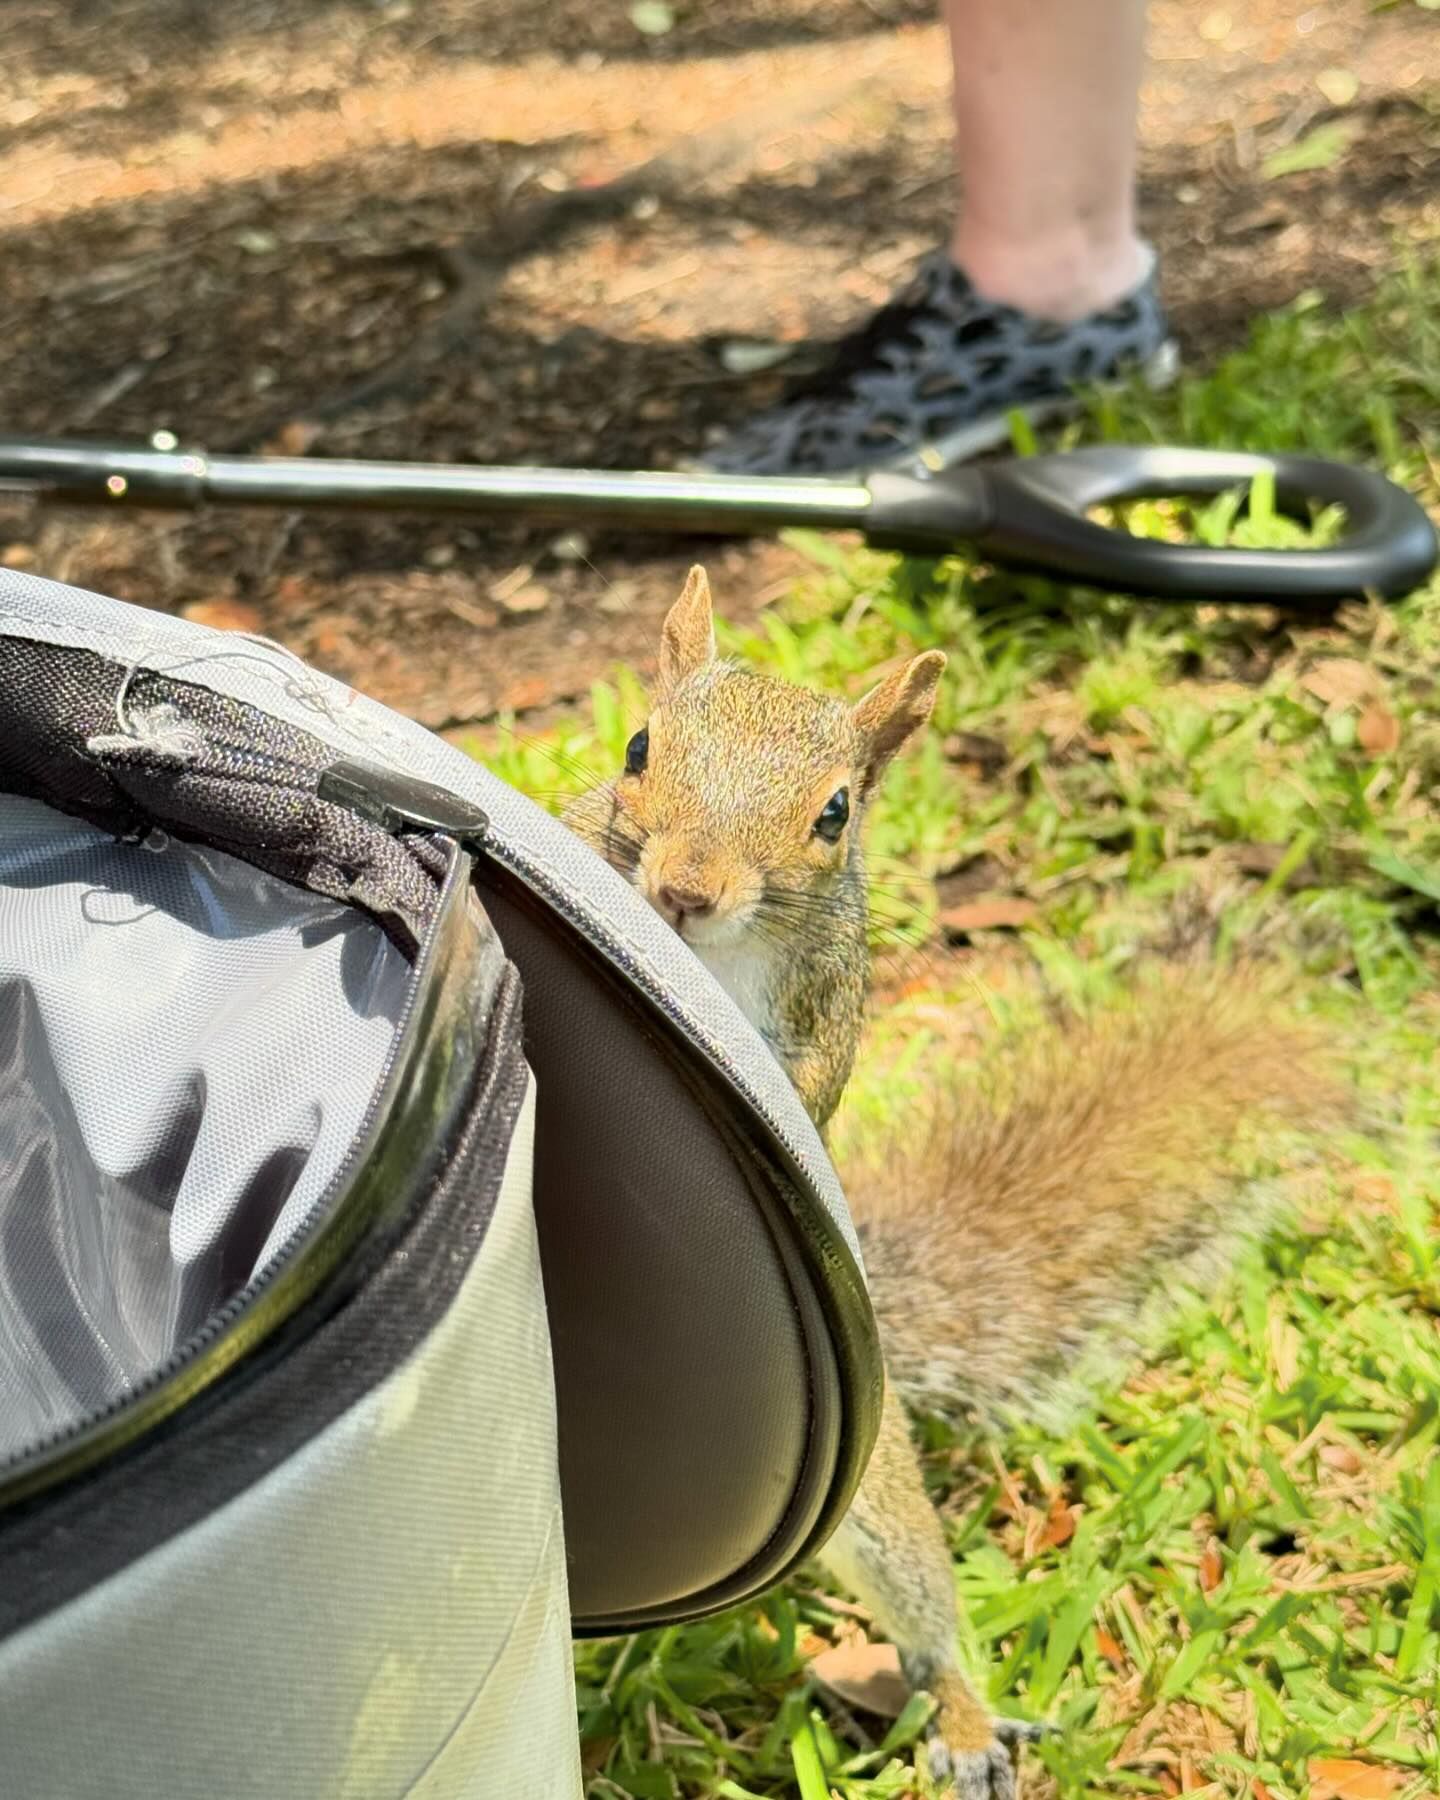 We made friends on our picnic. So cute 🖤
#squirrel